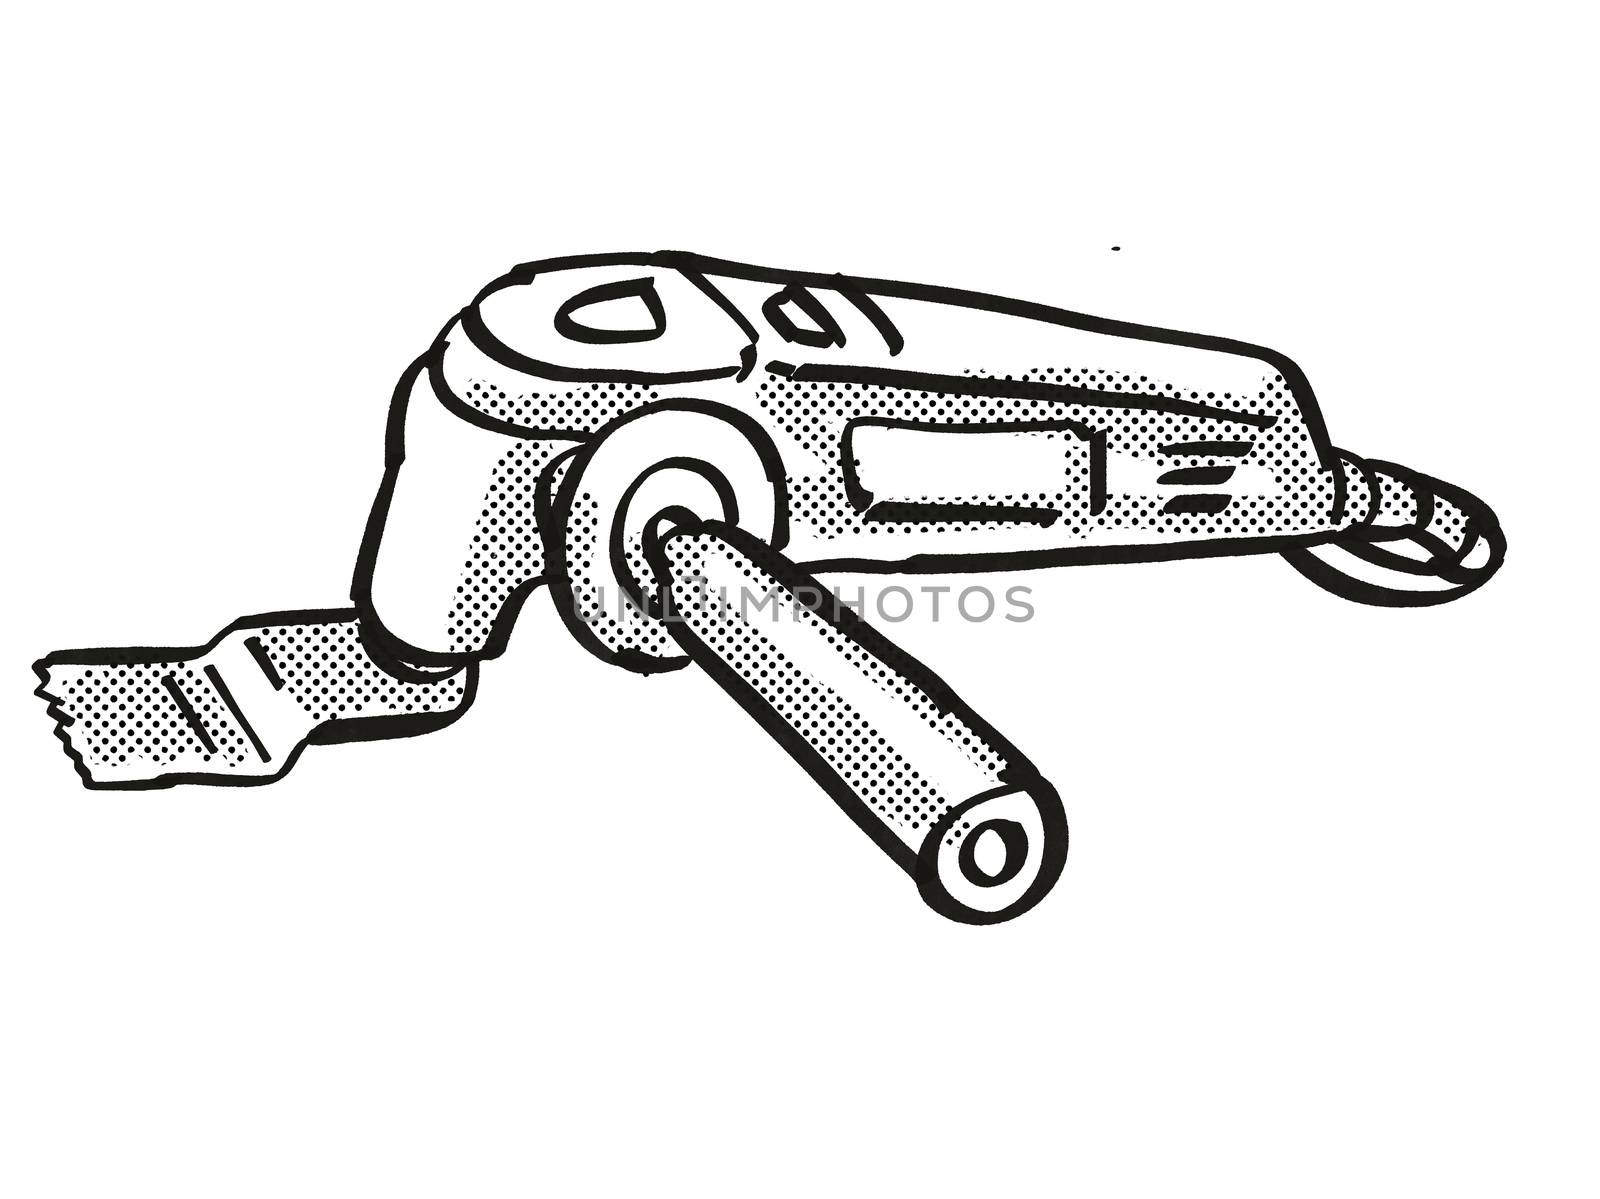 Retro cartoon style drawing of a Multi Function Tool, a power tool or equipment on isolated background done in black and white.